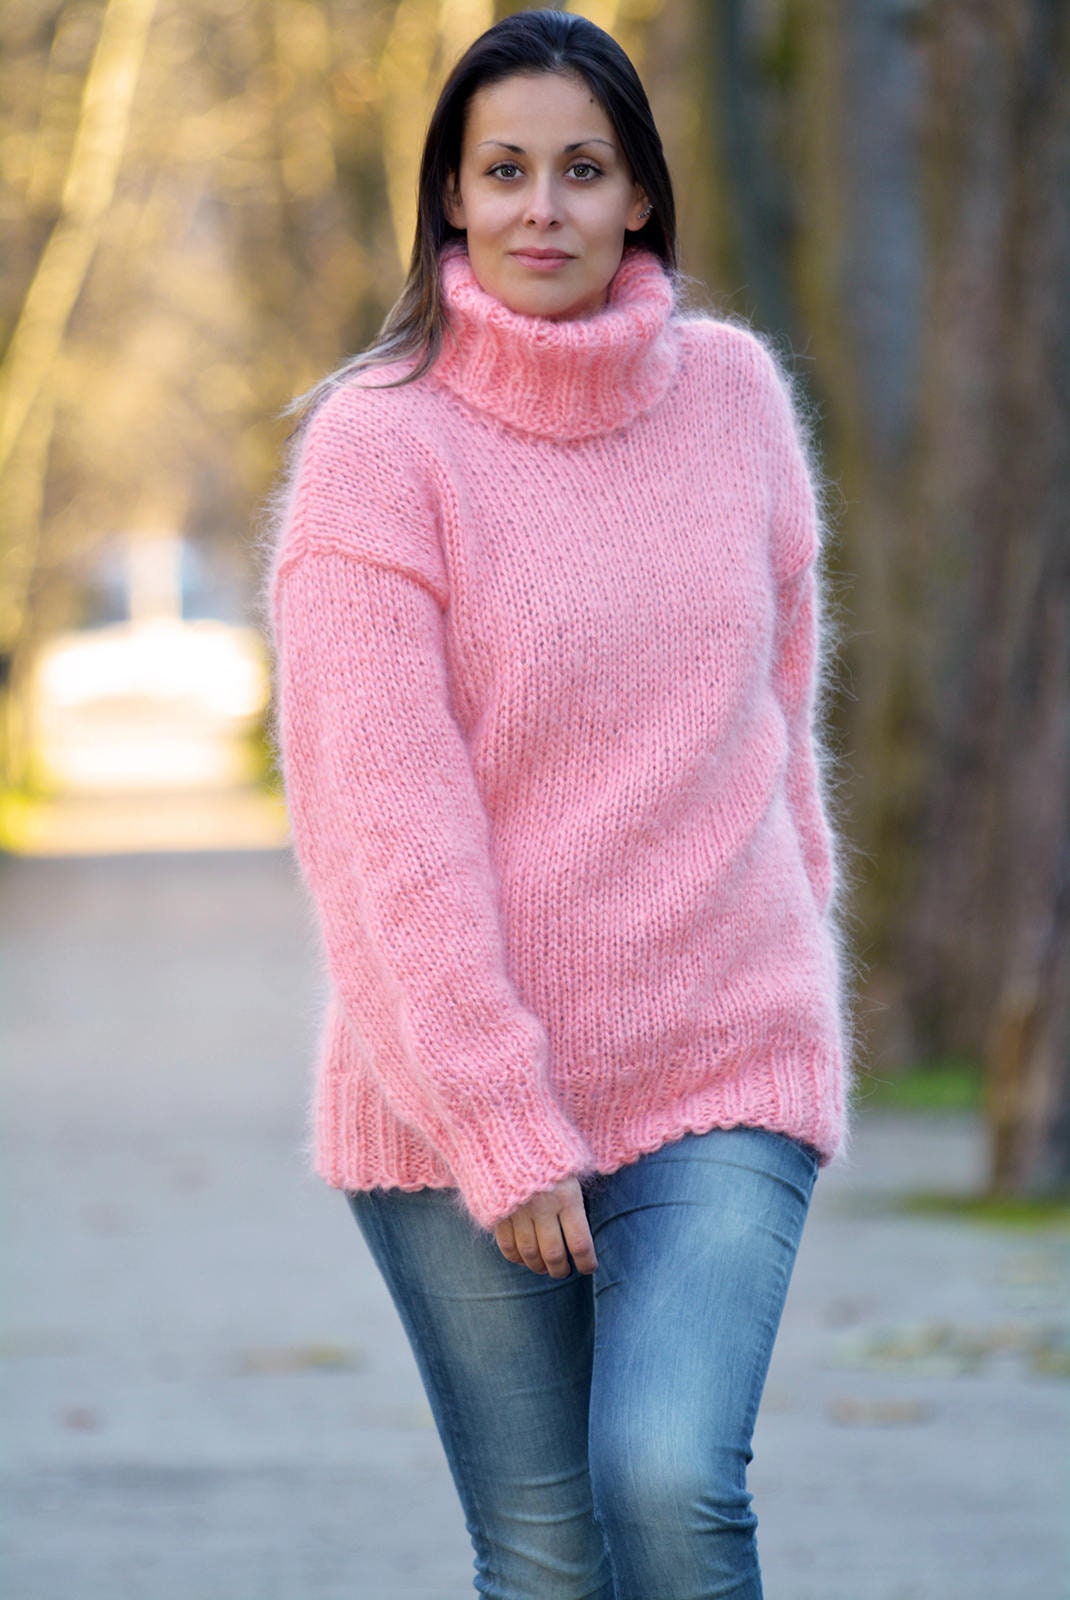 Designer Hand Knitted Mohair Sweater Pink Turtleneck Fuzzy | Etsy